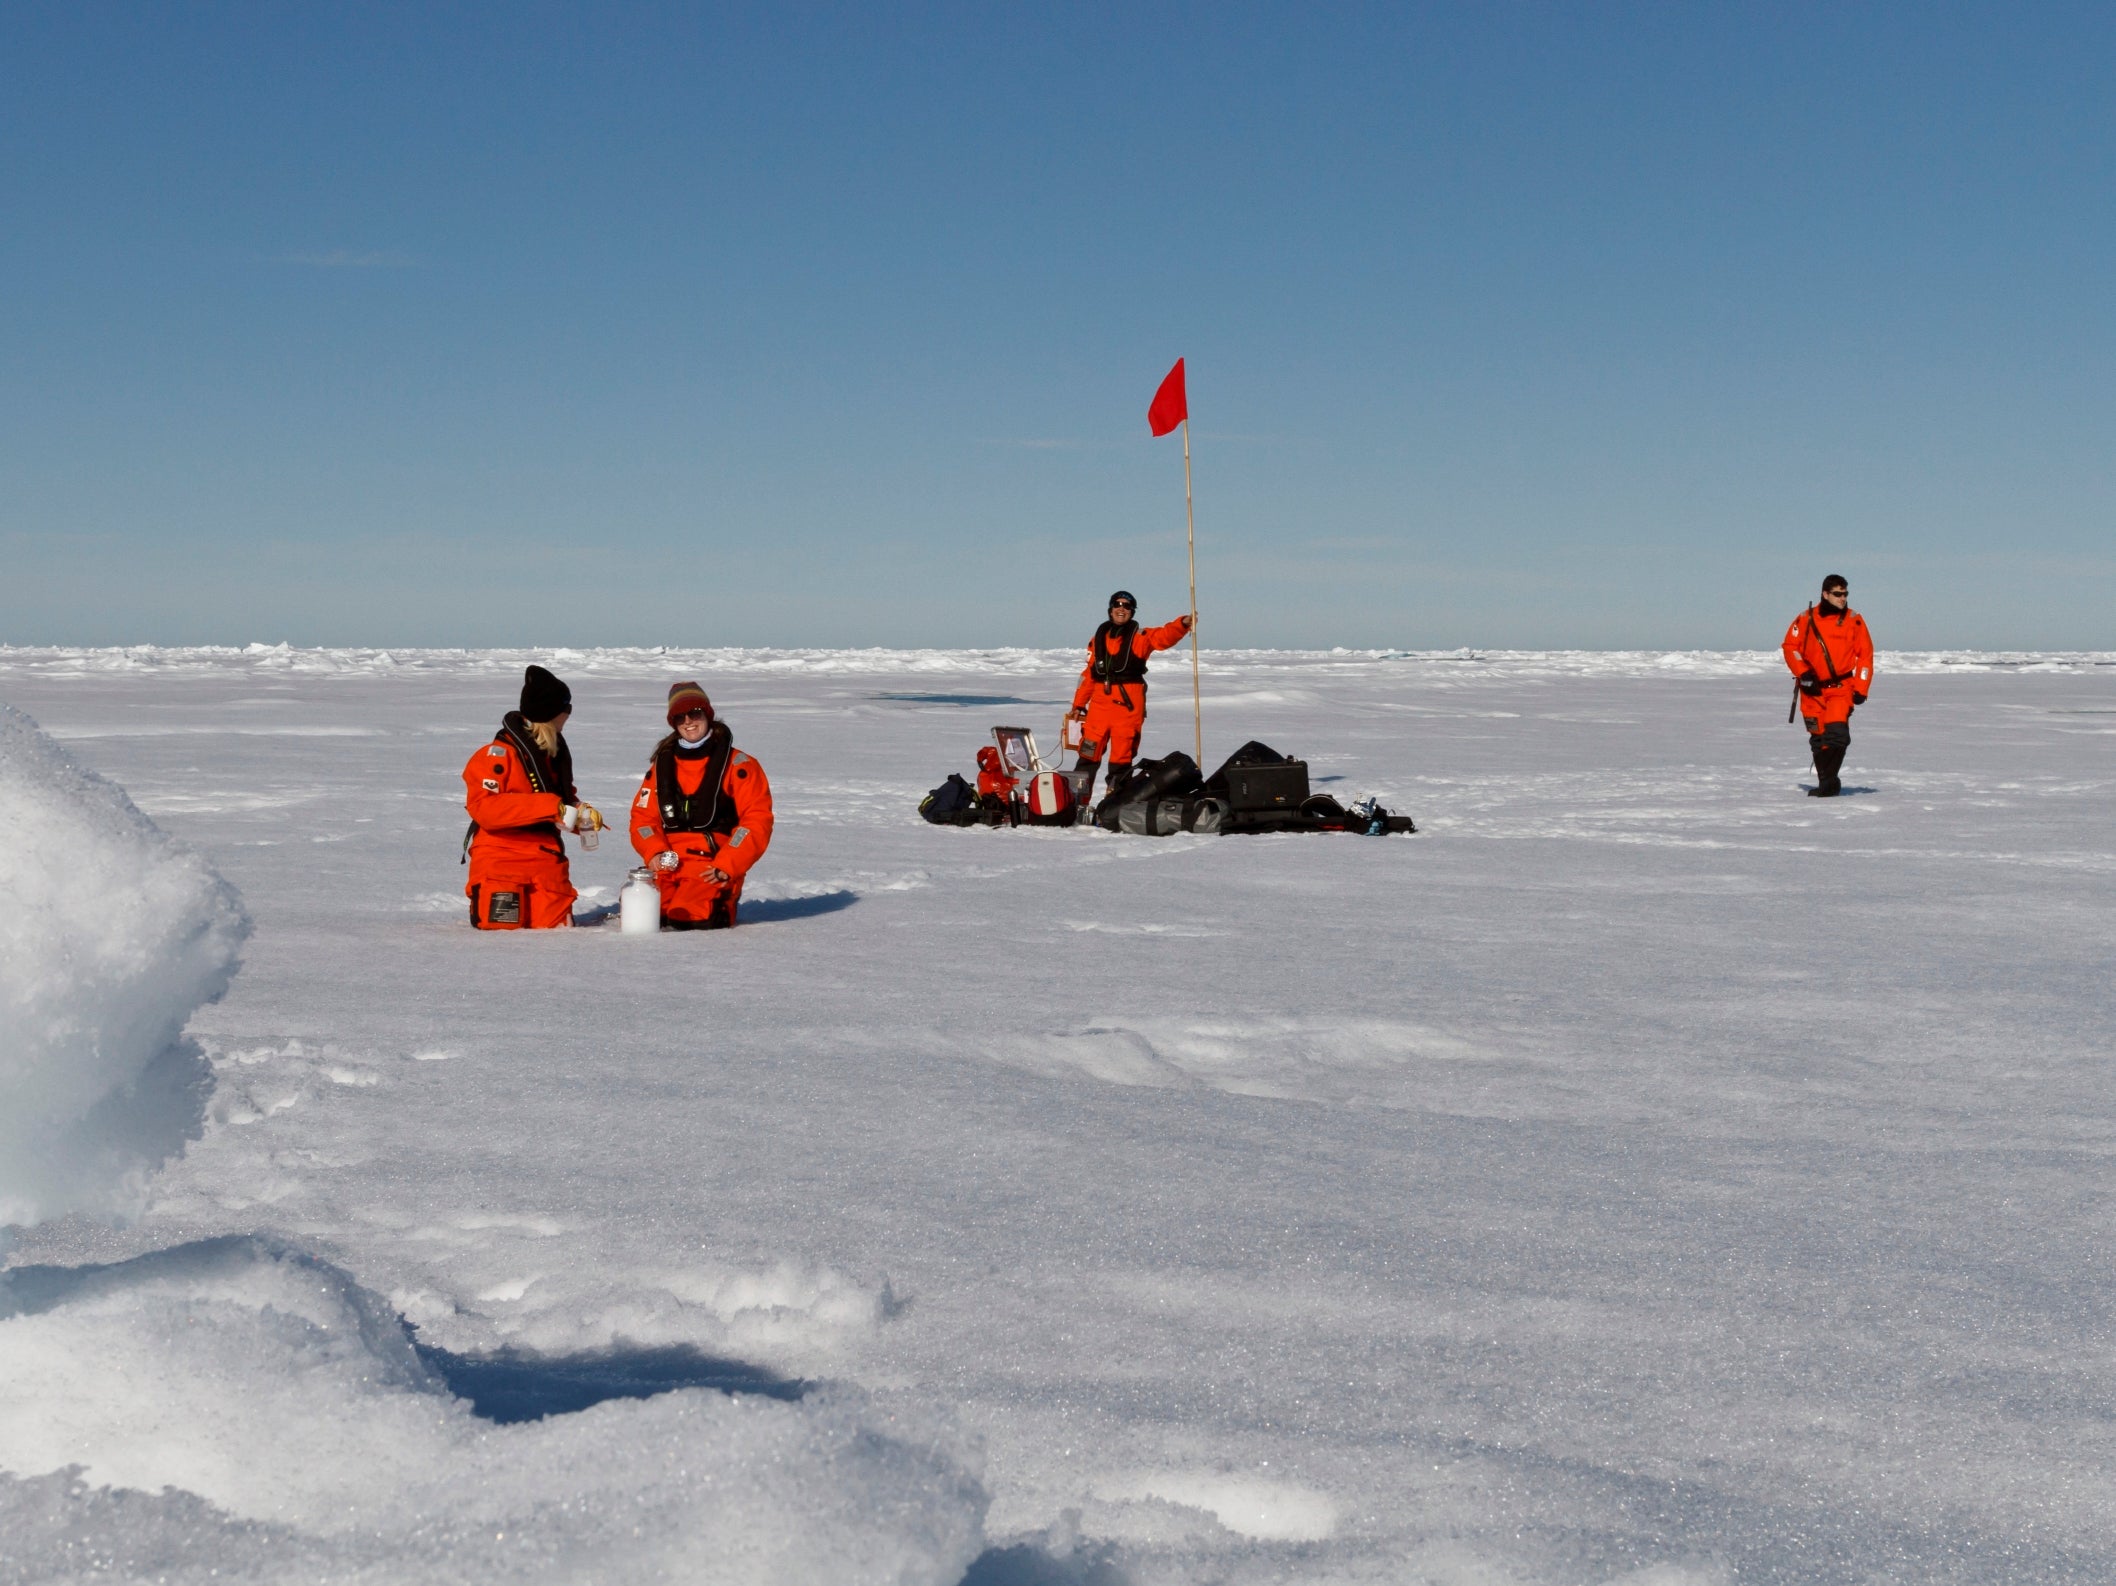 Scientists from the Alfred Wegener Institute collect snow and ice samples to measure the extent of microplastic pollution